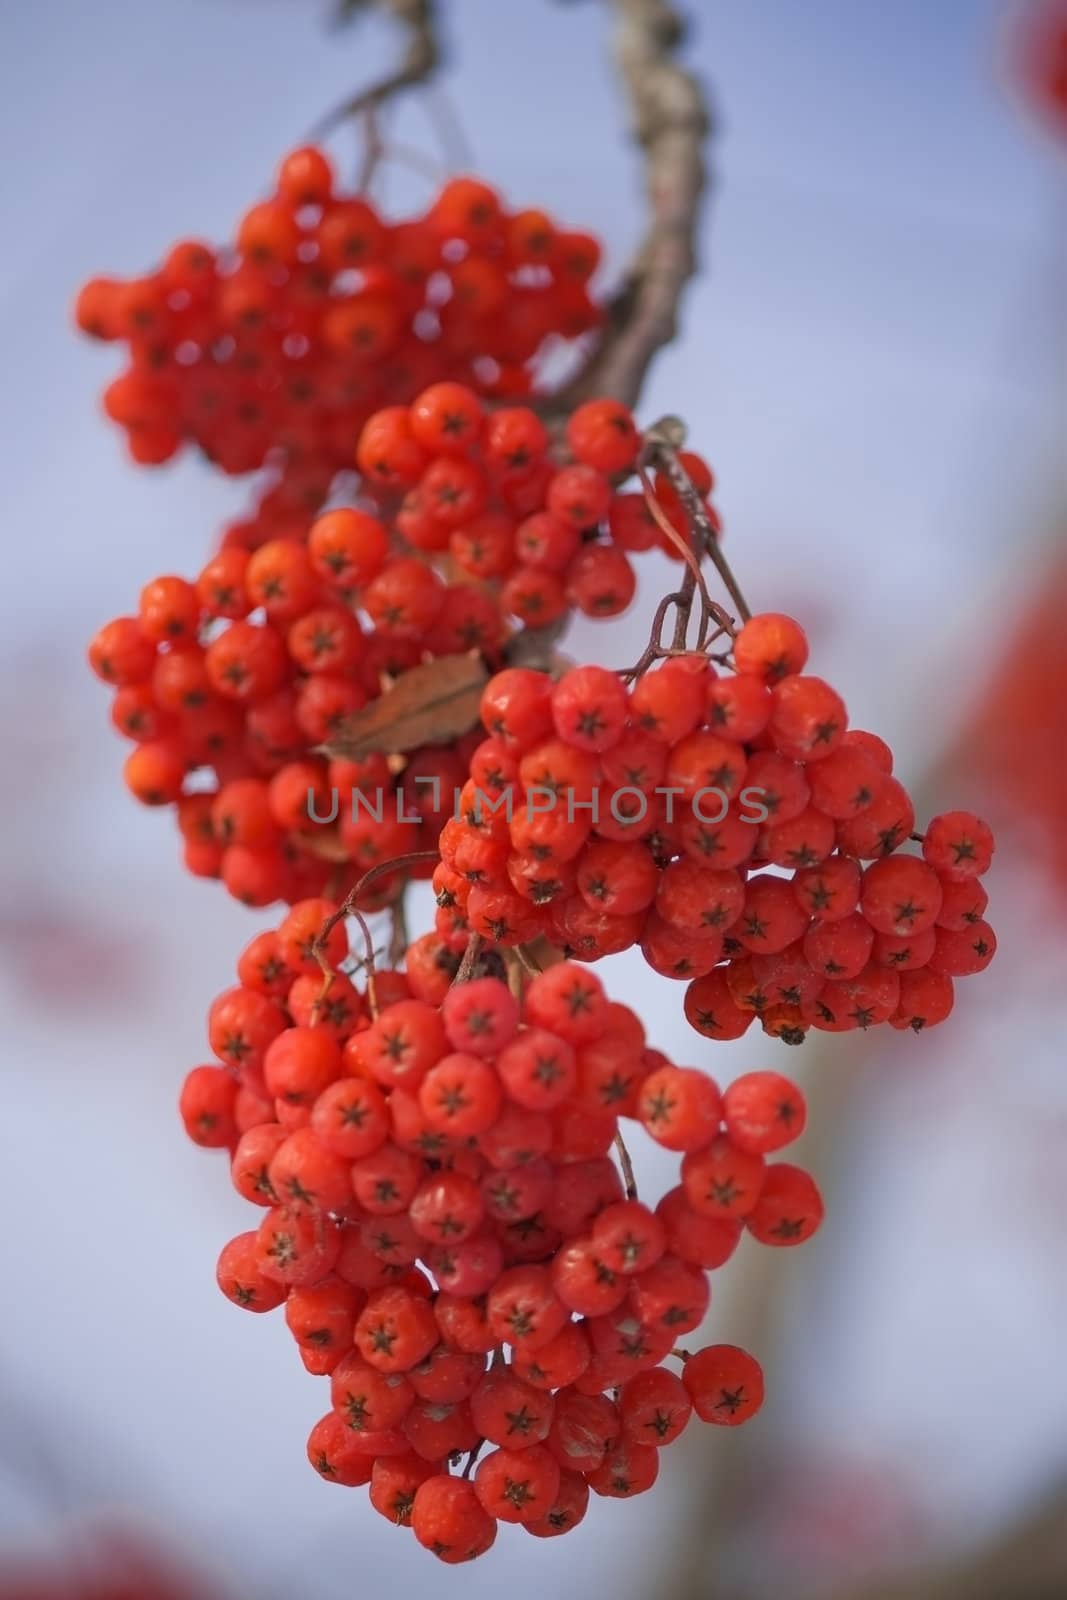 Red berries of mountain ash in the branches against the blue sky.